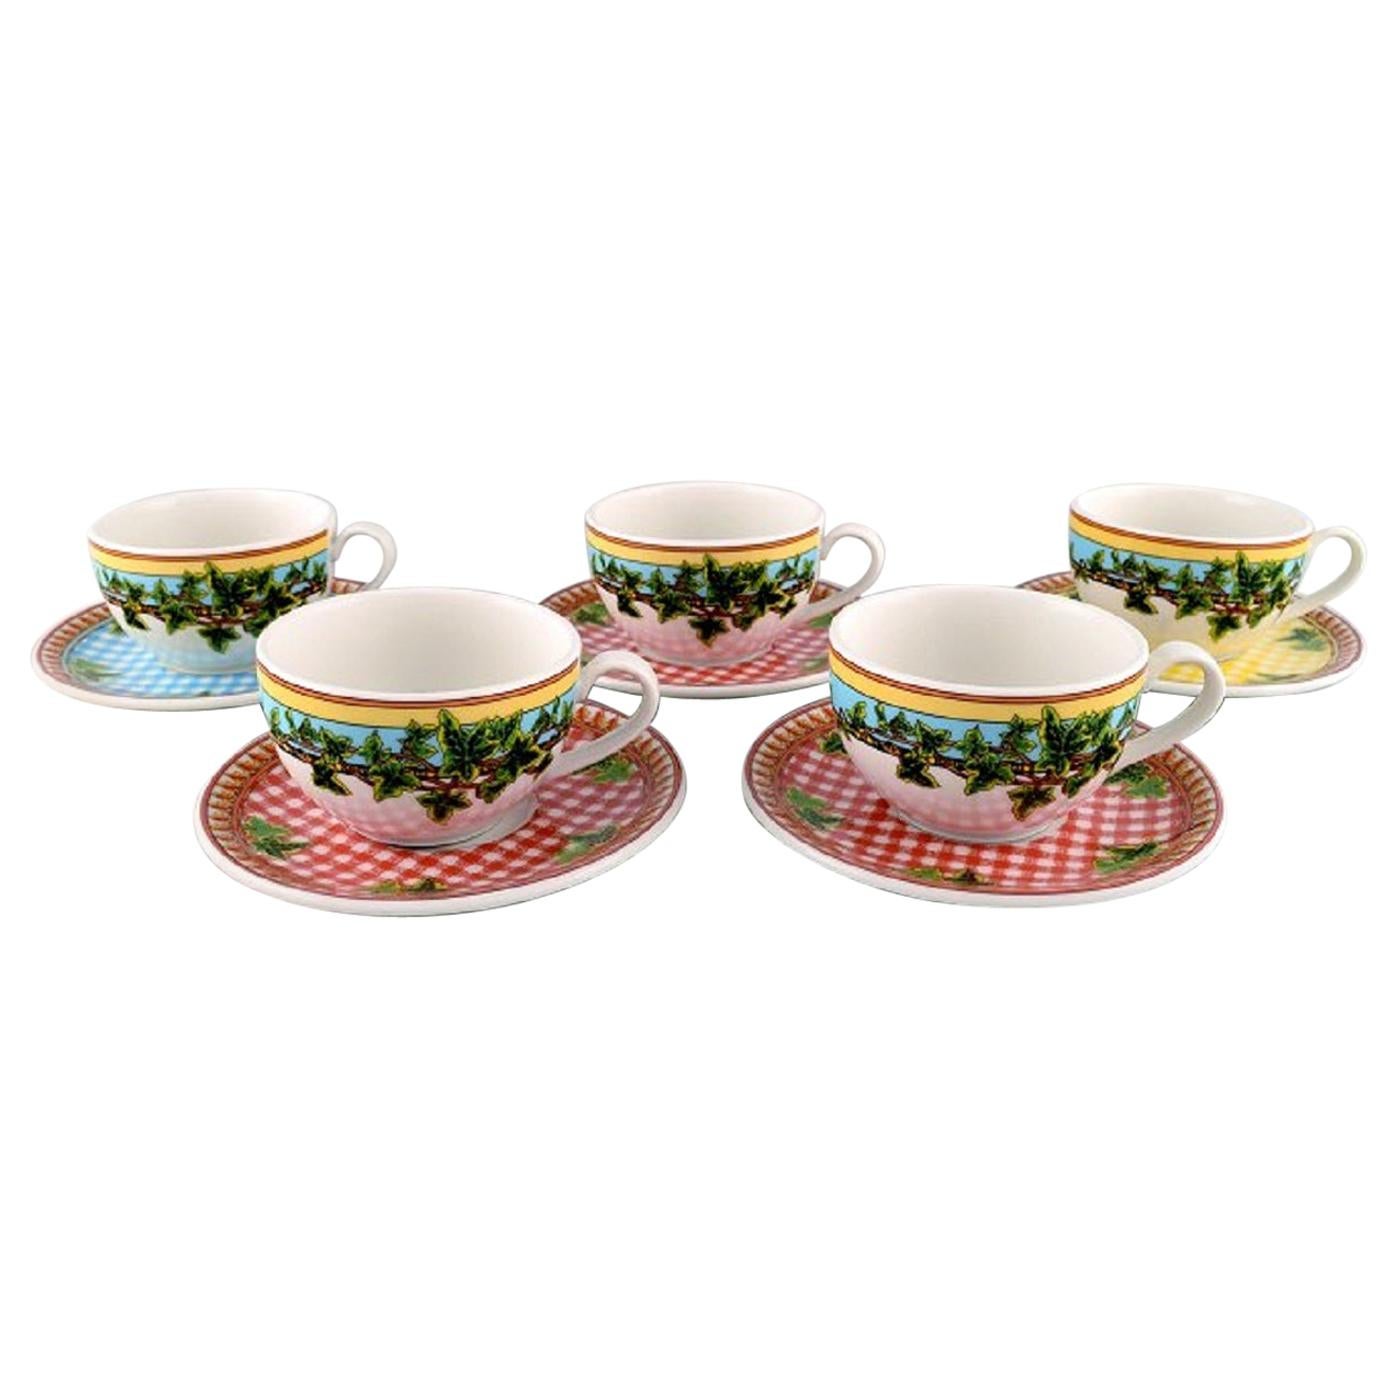 Gianni Versace for Rosenthal, Five Large "Ivy Leaves" Teacups with Saucers For Sale